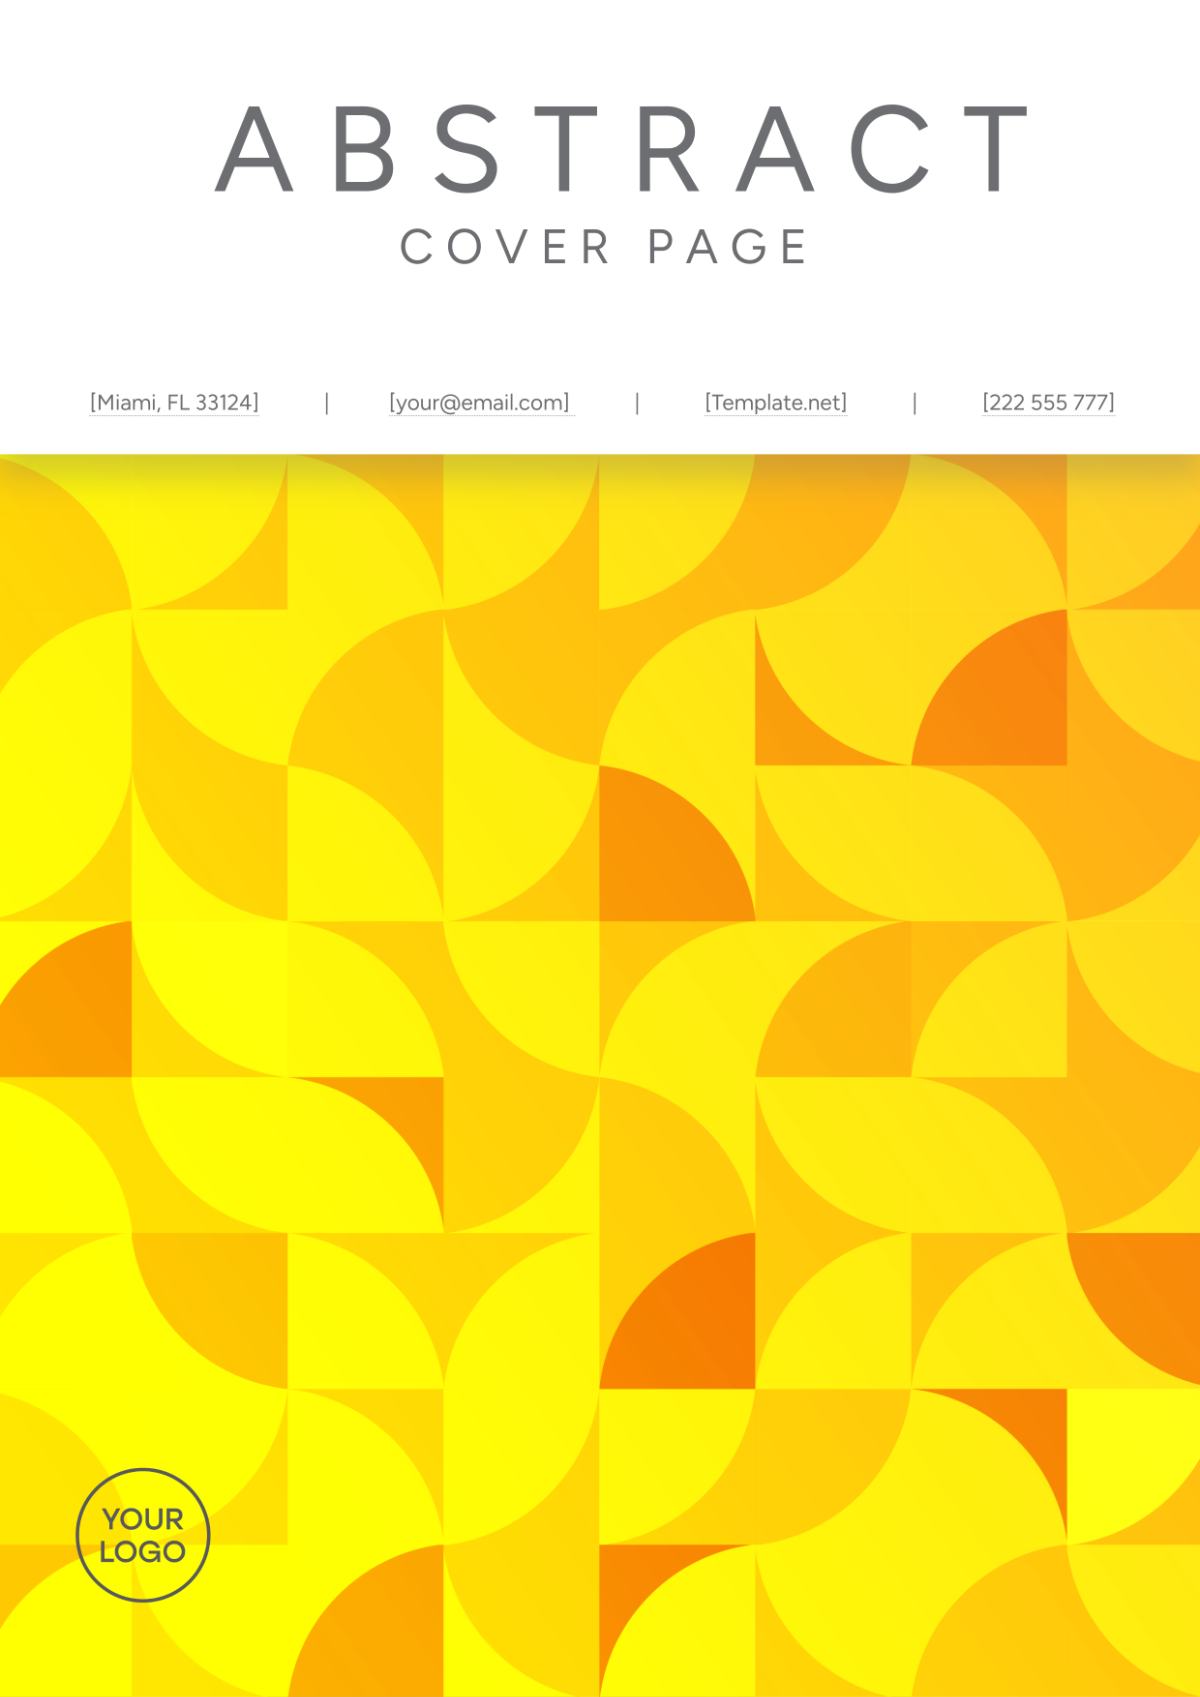 Free Abstract Cover Page Image Template